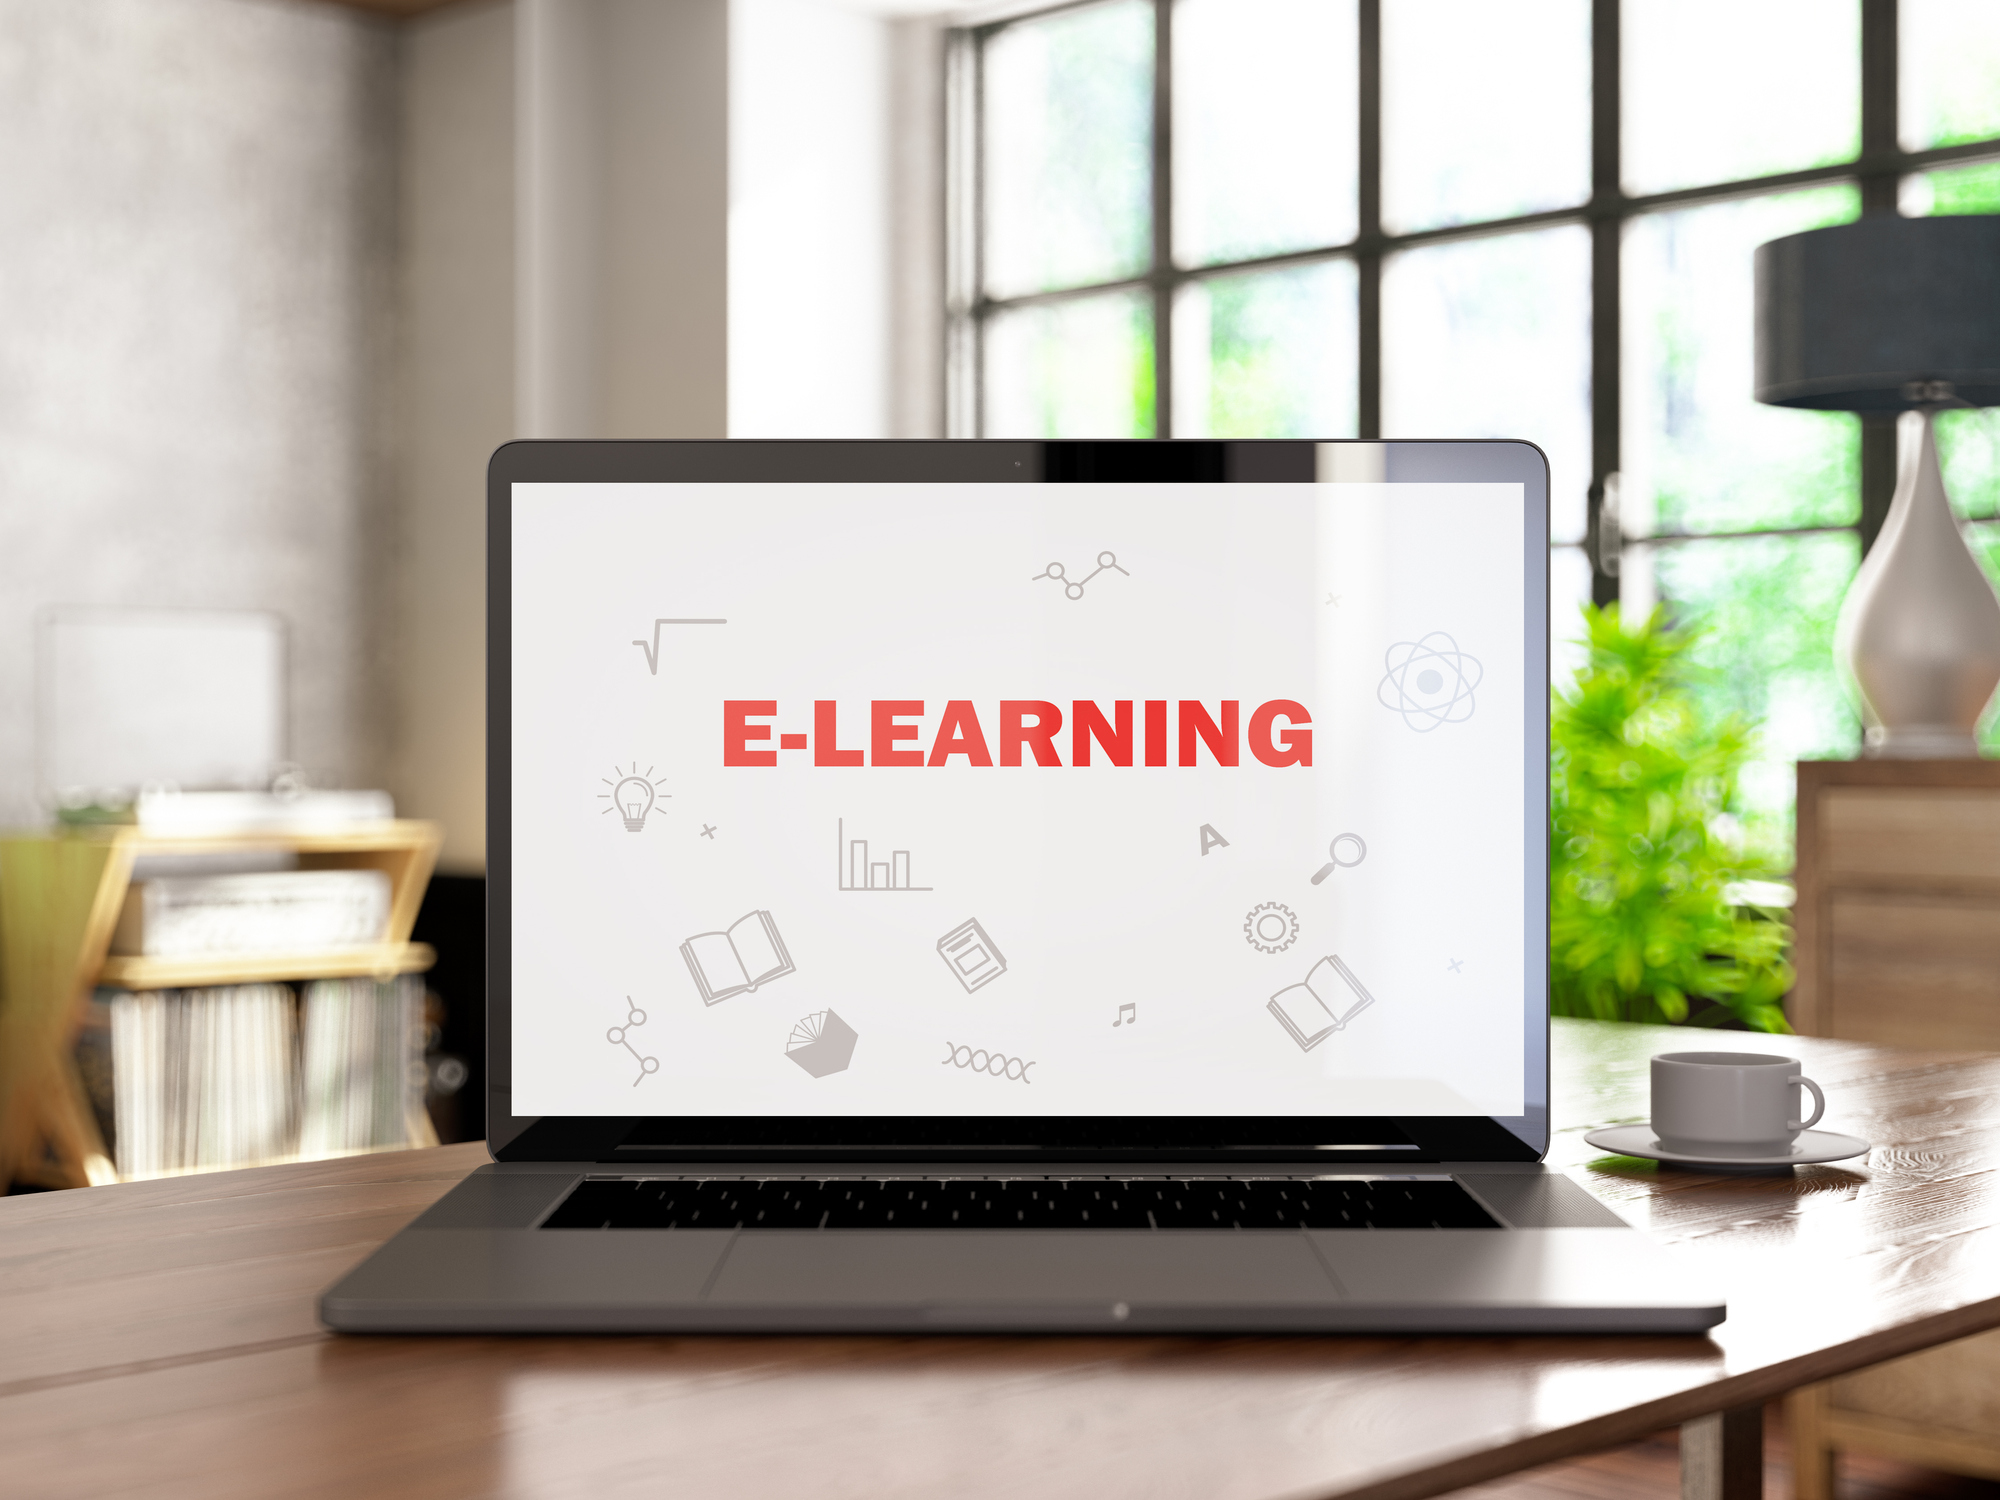 e-learning text on a laptop